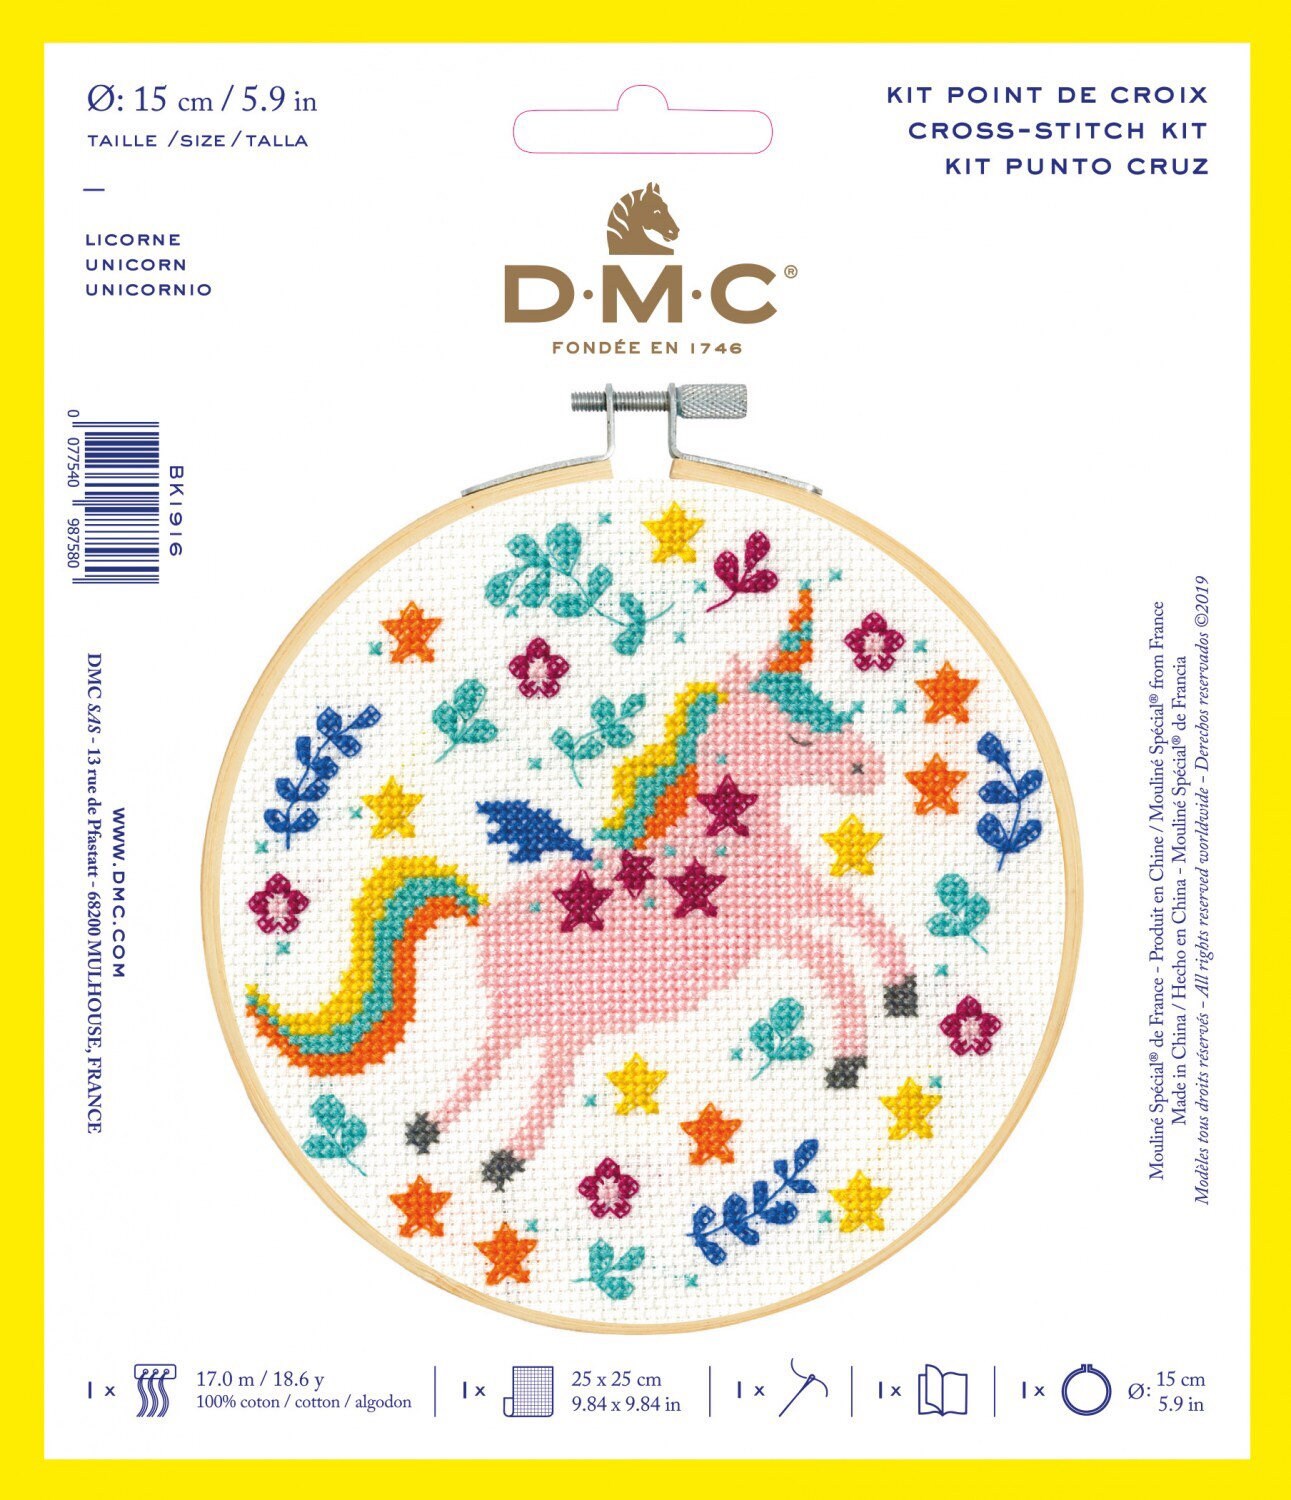 Unicorn Cross Stitch Kit - Pattern, Floss, Fabric, Hoop and Needle included